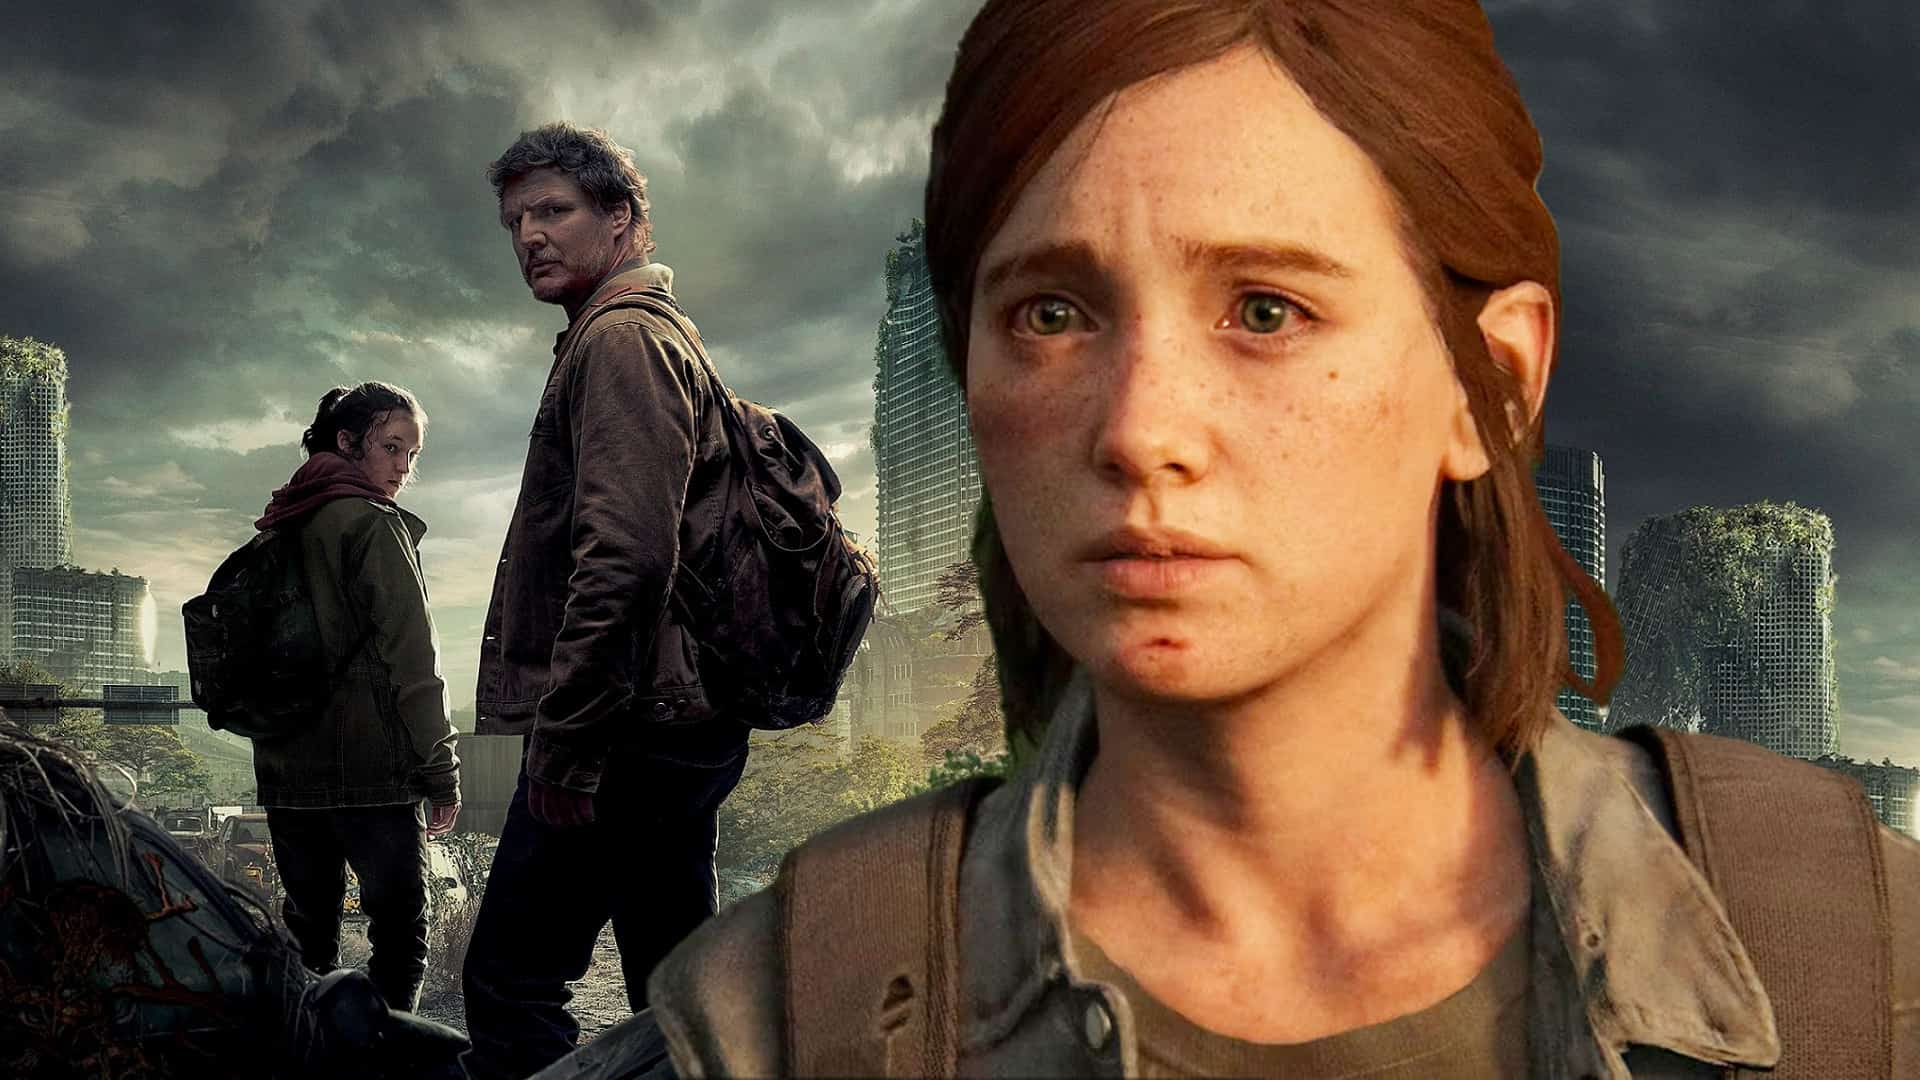 the last of us part 3 release date: The Last of Us Part 3: When will the  post-apocalyptic saga release? All about it - The Economic Times